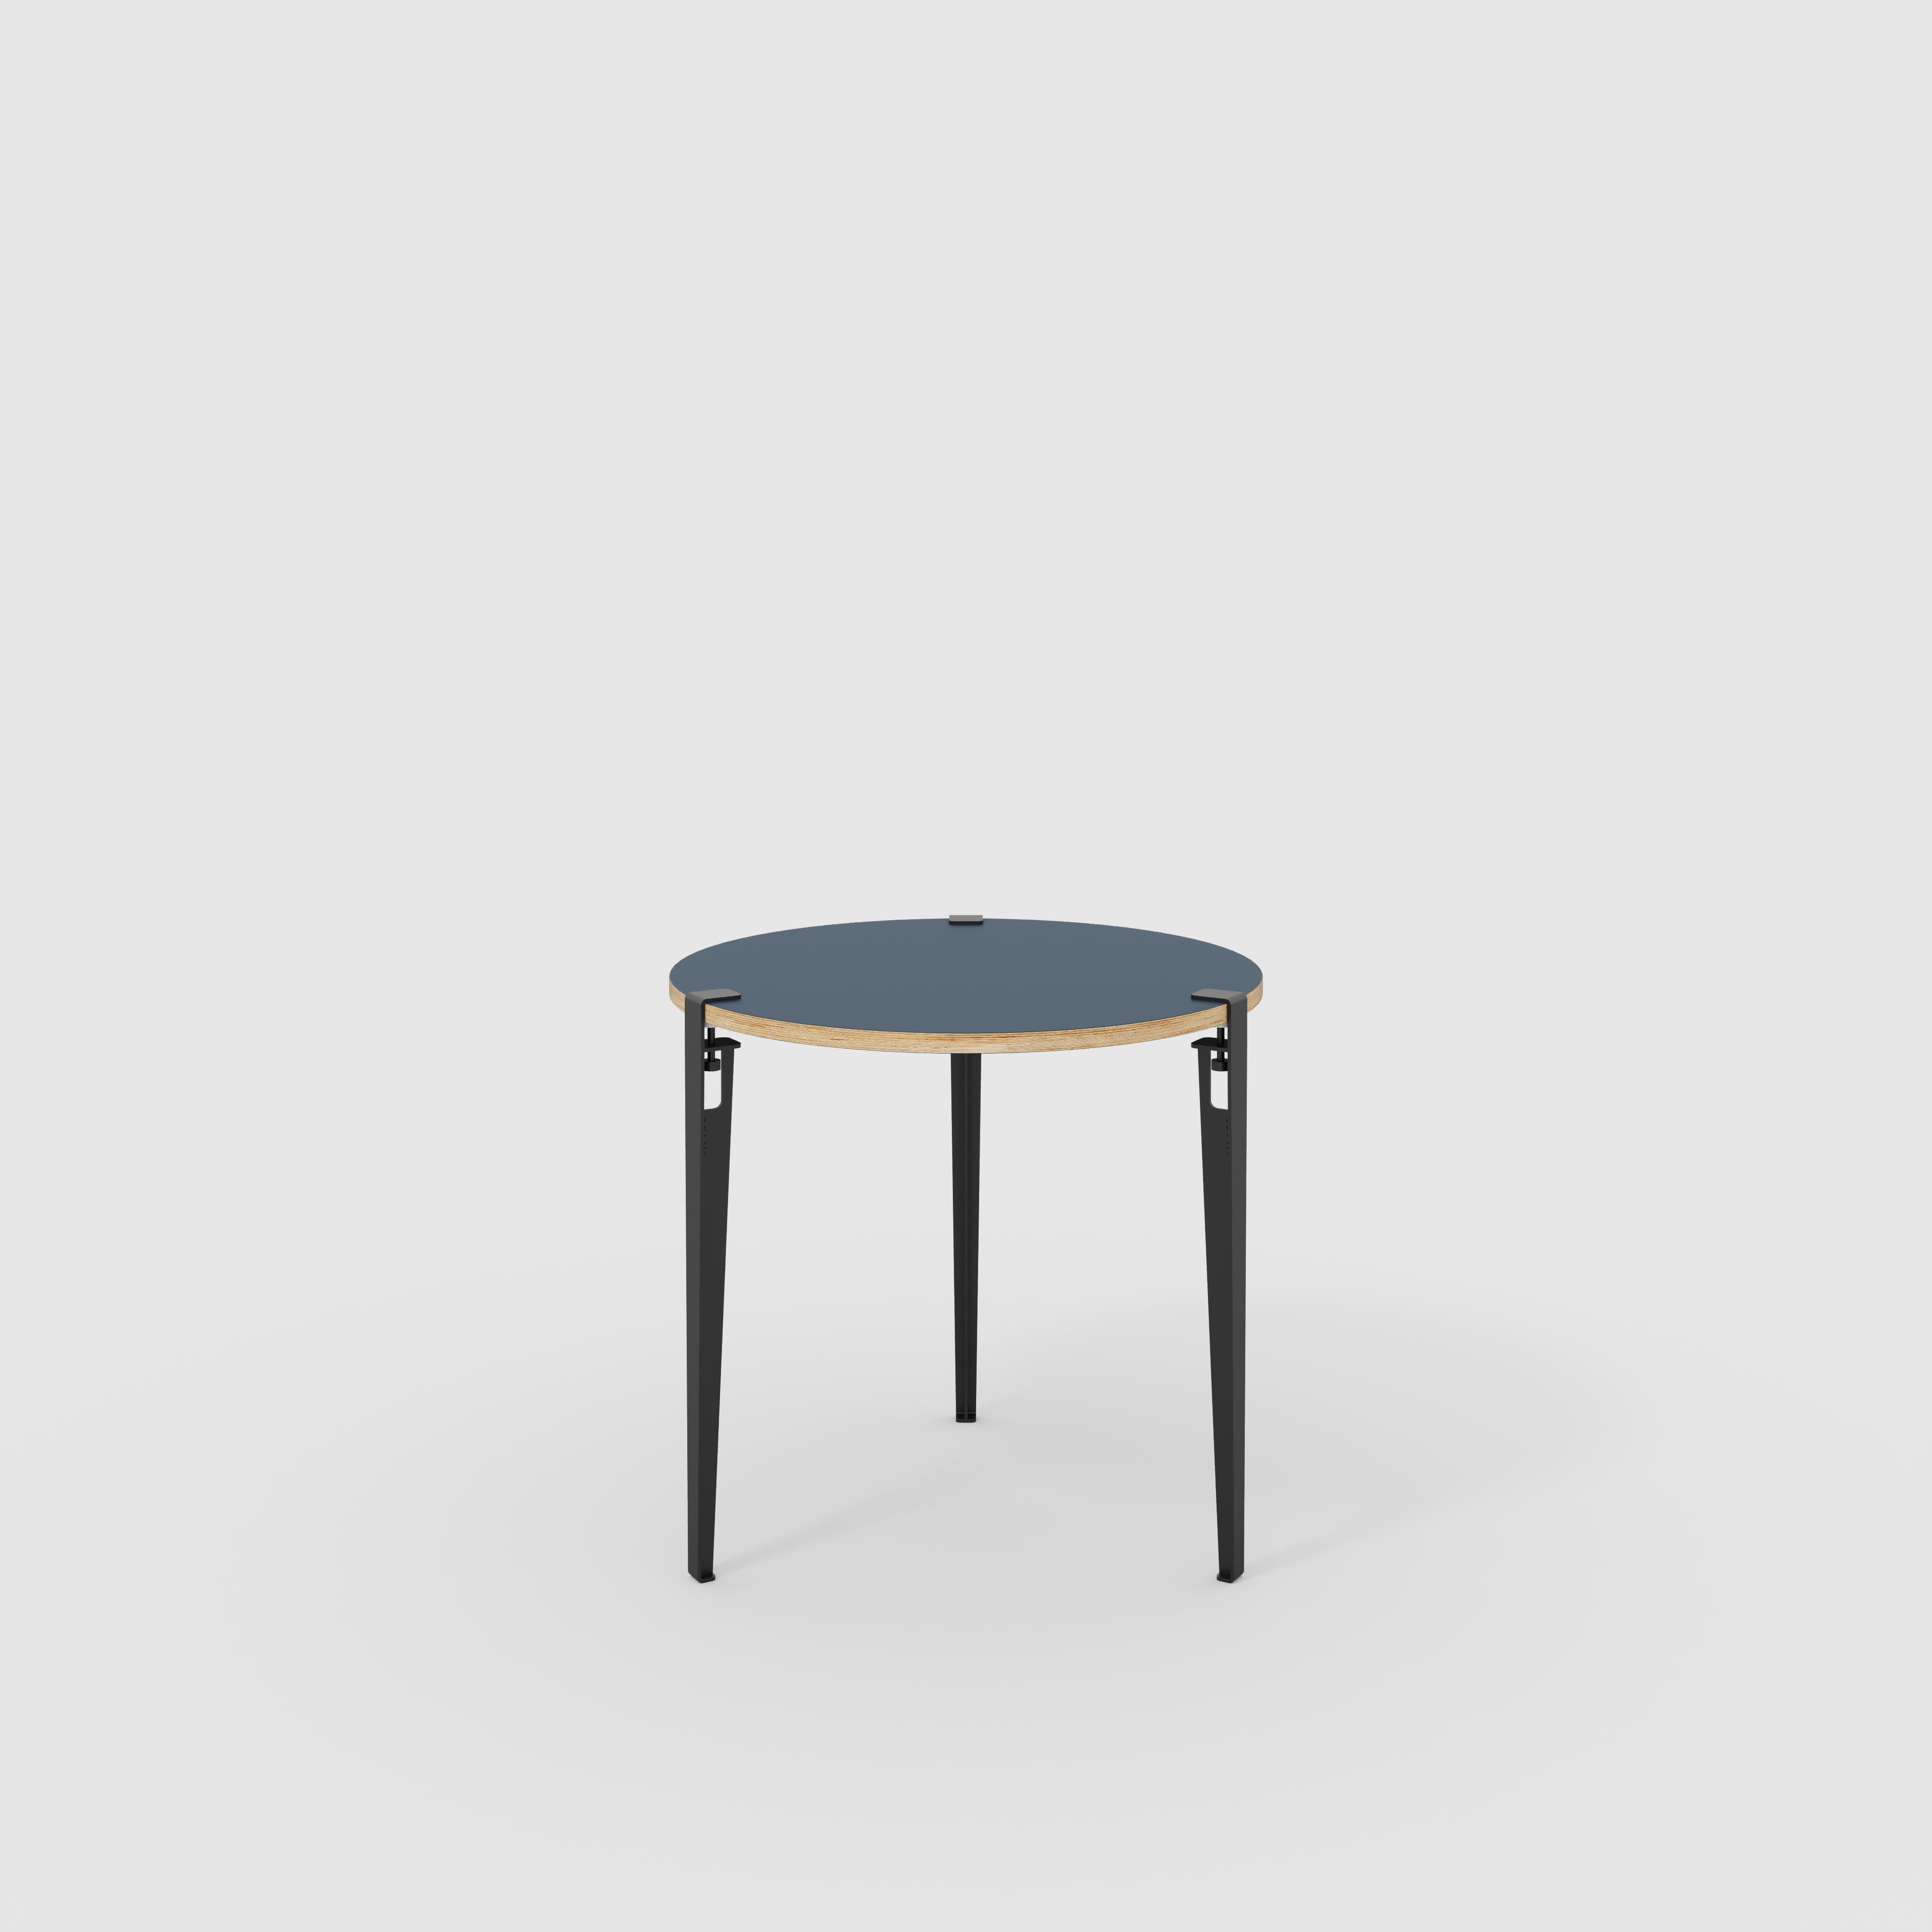 Round Table with Black Tiptoe Legs - Formica Night Sea Blue - 800(dia) x 750(h)